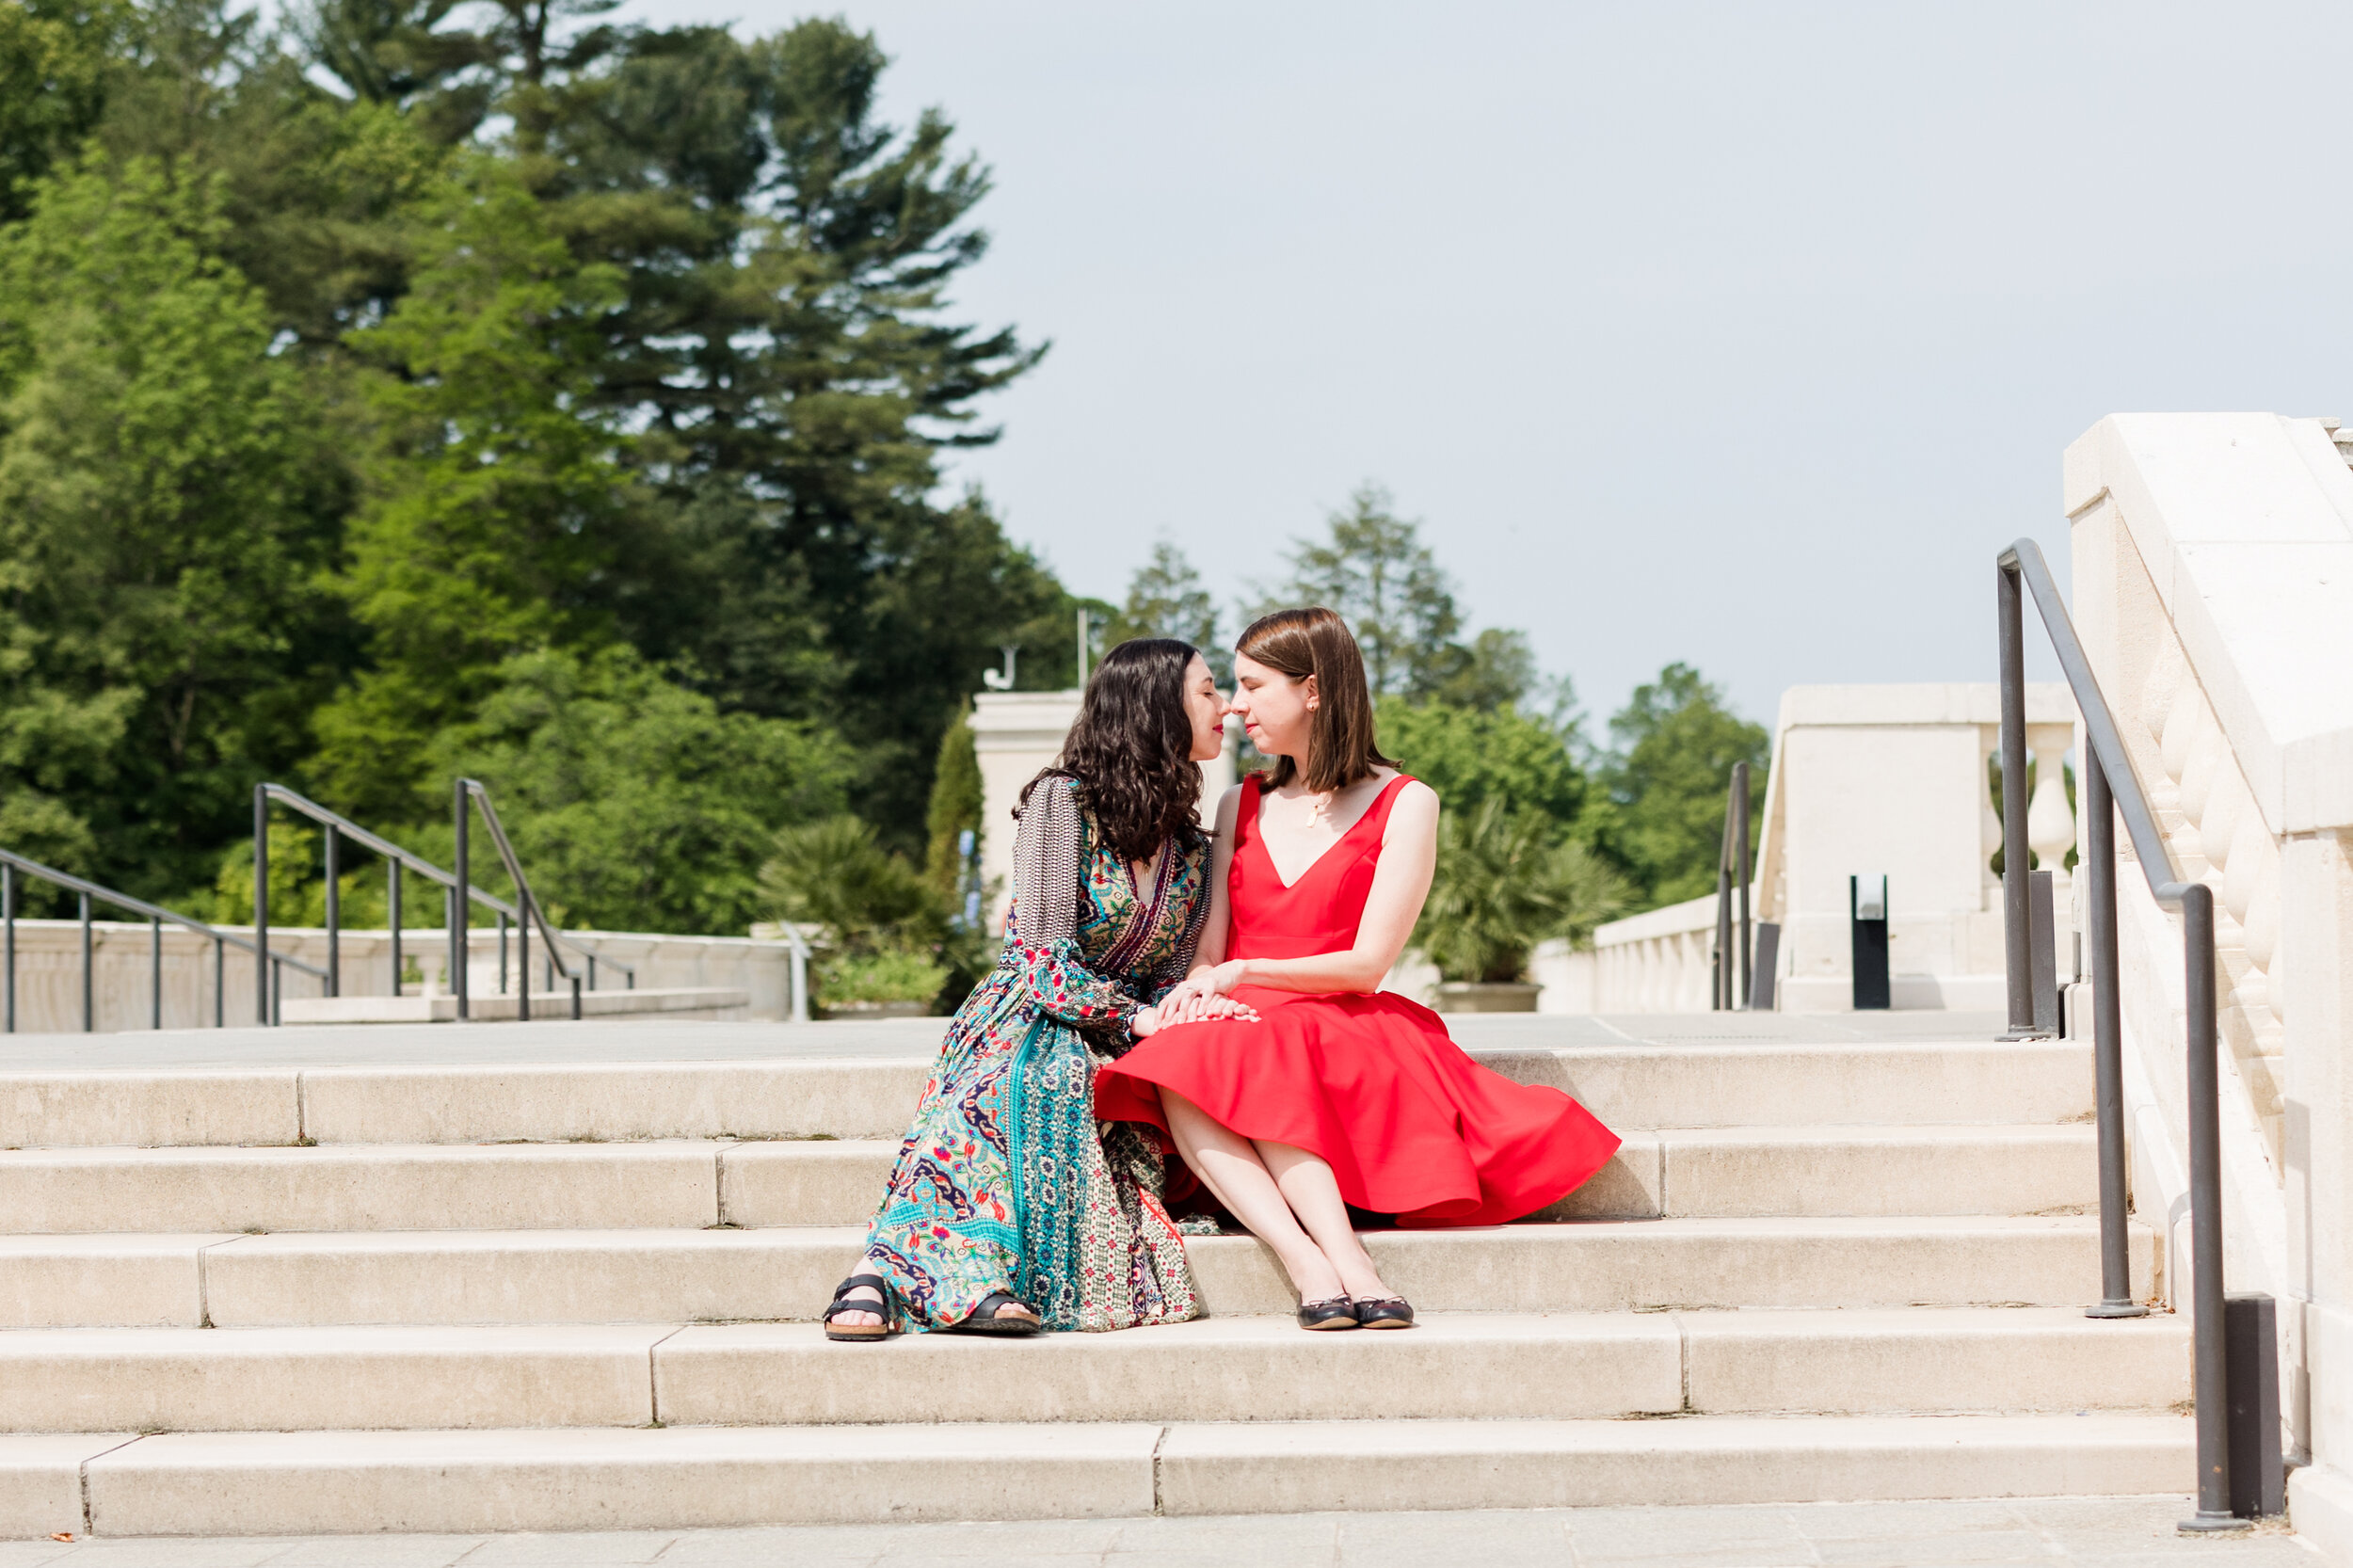 Dorothy-and-Kate-LGBTQ-Longwood-Gardens-Engagement-Session-63.jpg